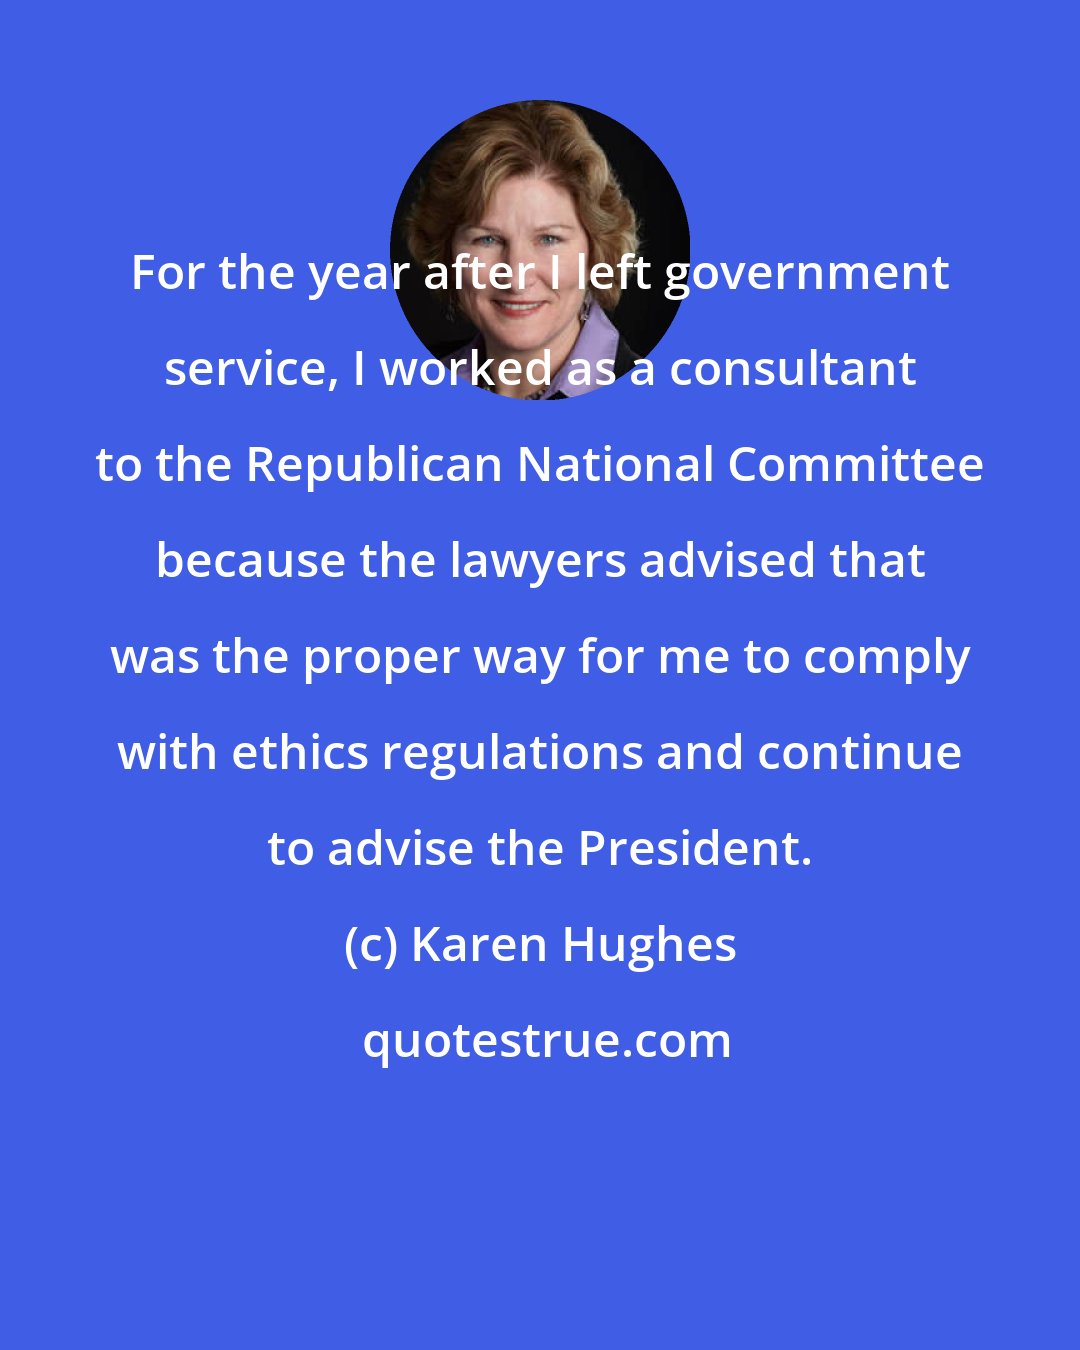 Karen Hughes: For the year after I left government service, I worked as a consultant to the Republican National Committee because the lawyers advised that was the proper way for me to comply with ethics regulations and continue to advise the President.